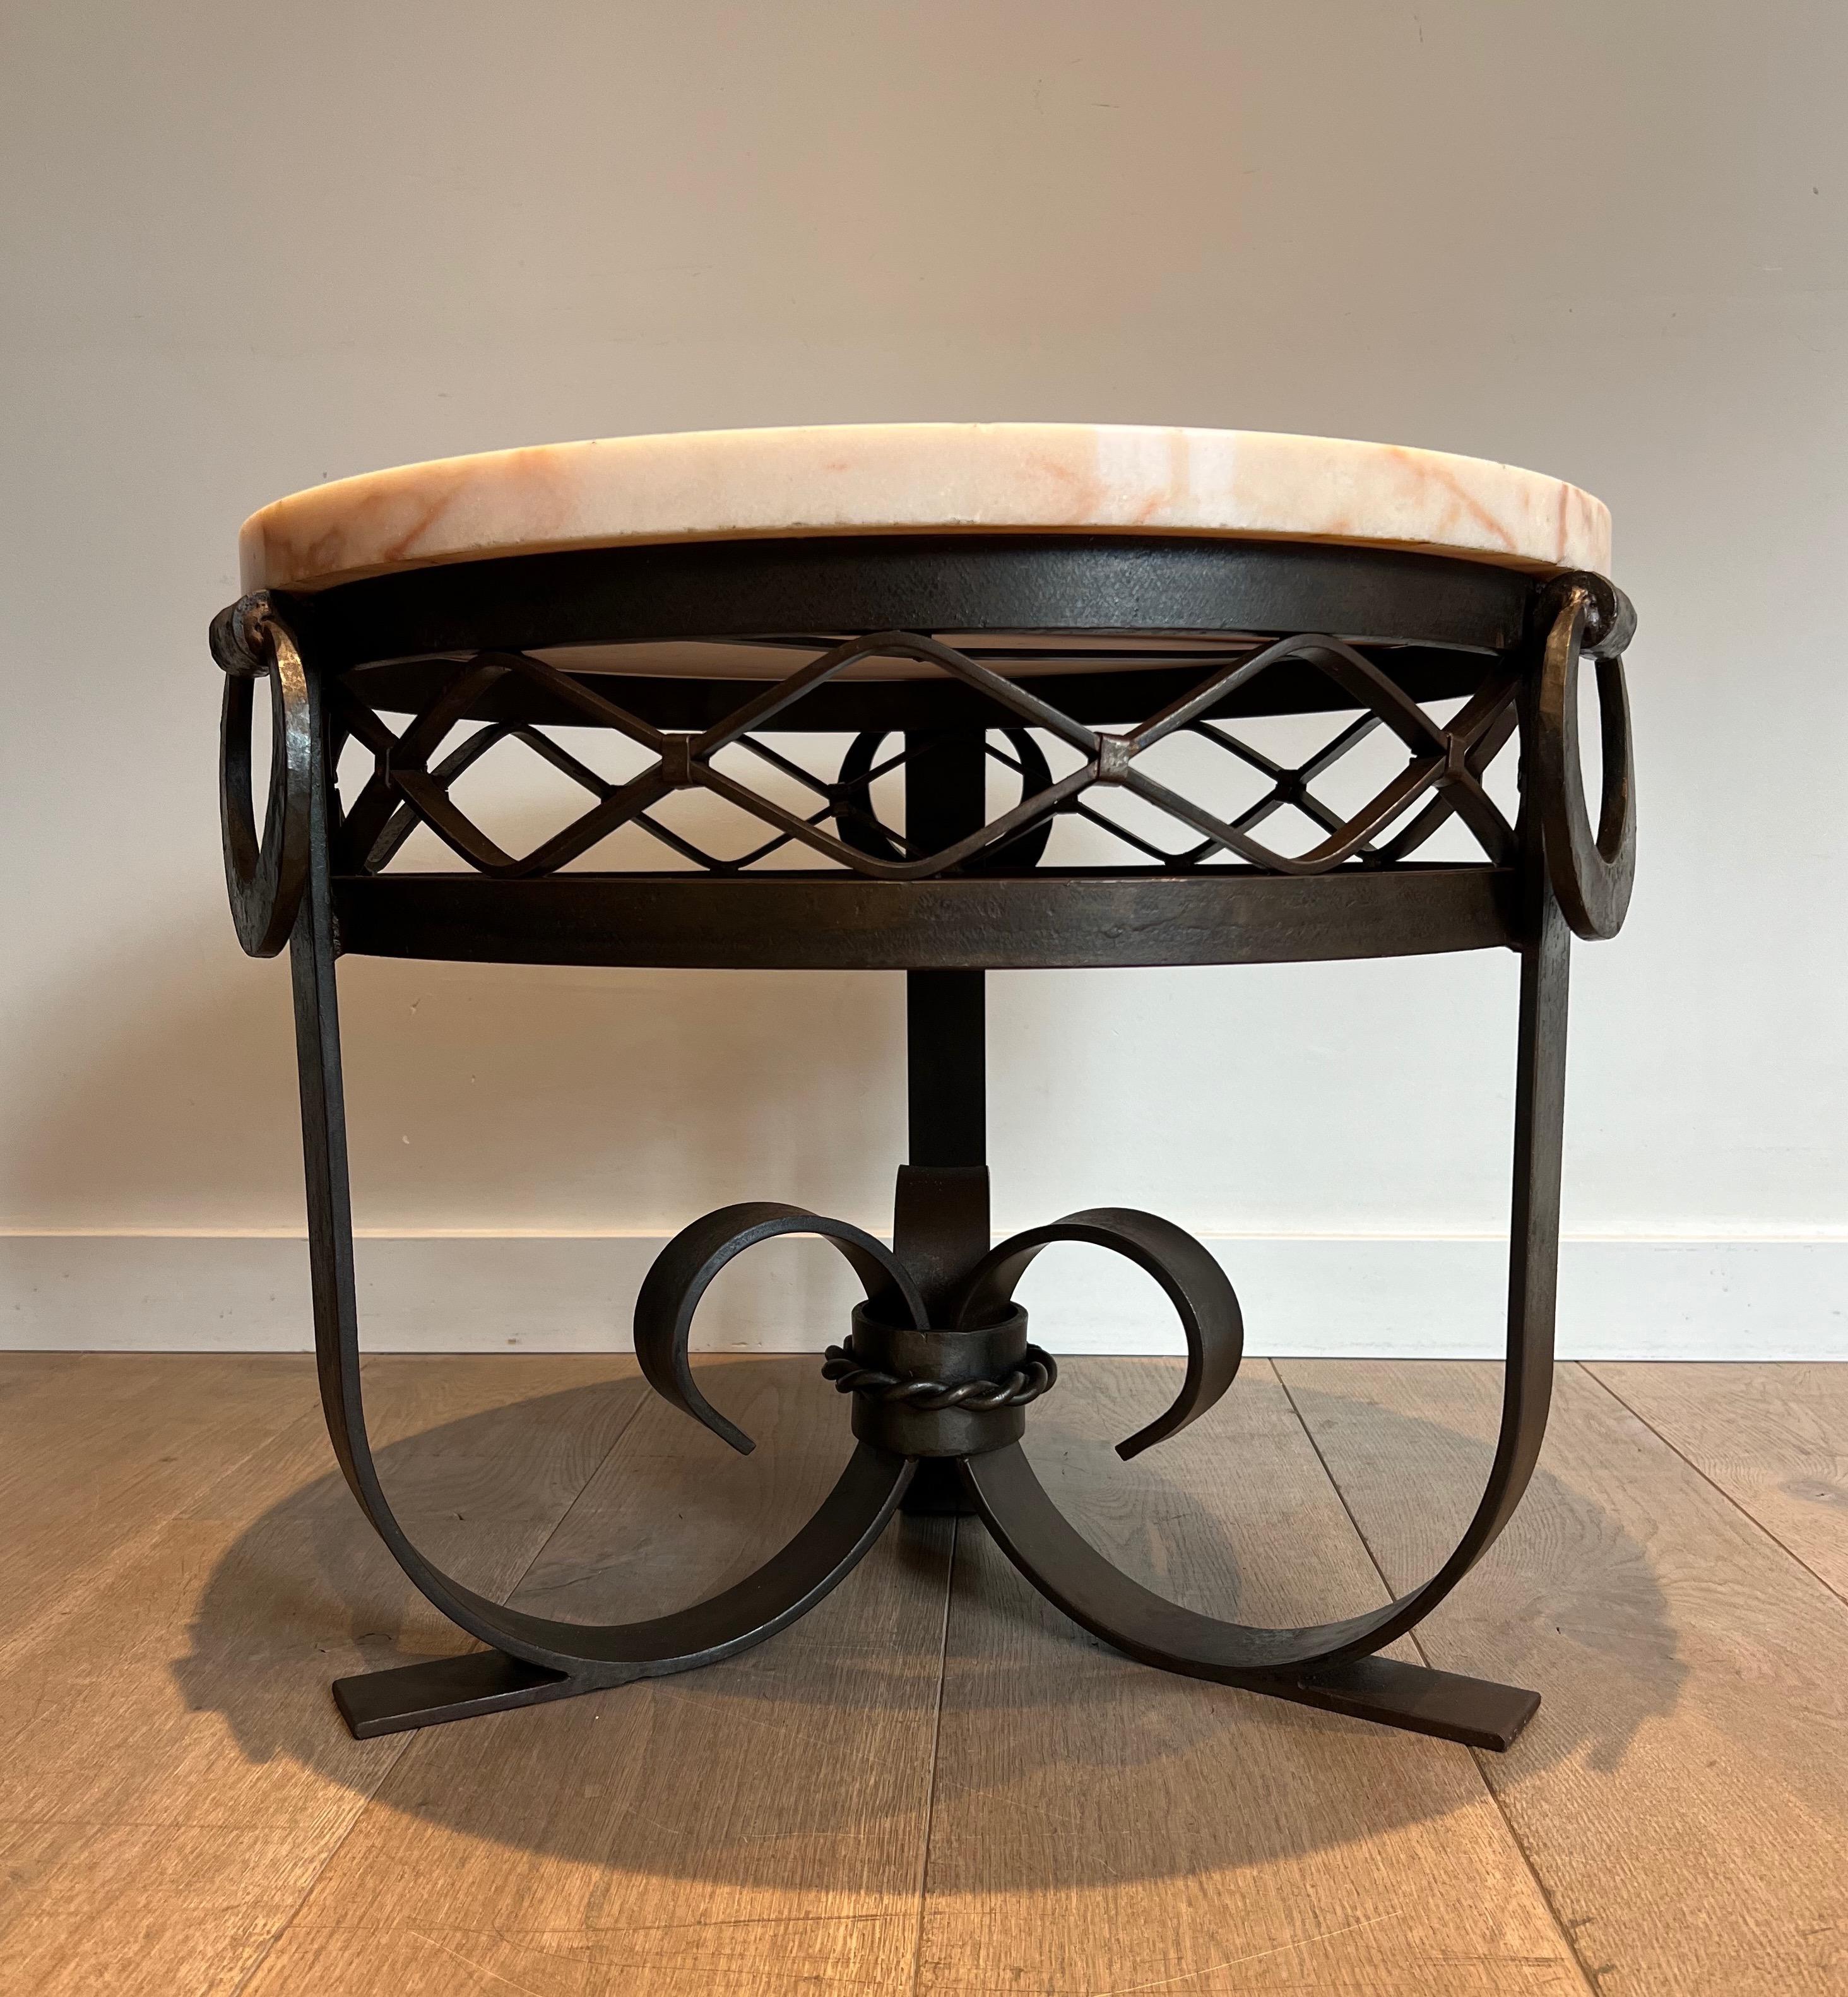 This very nice Gueridon is made of wrought and hammered iron with a thick round white marble top. This is a French Work form the Art Deco period. Circa 1930